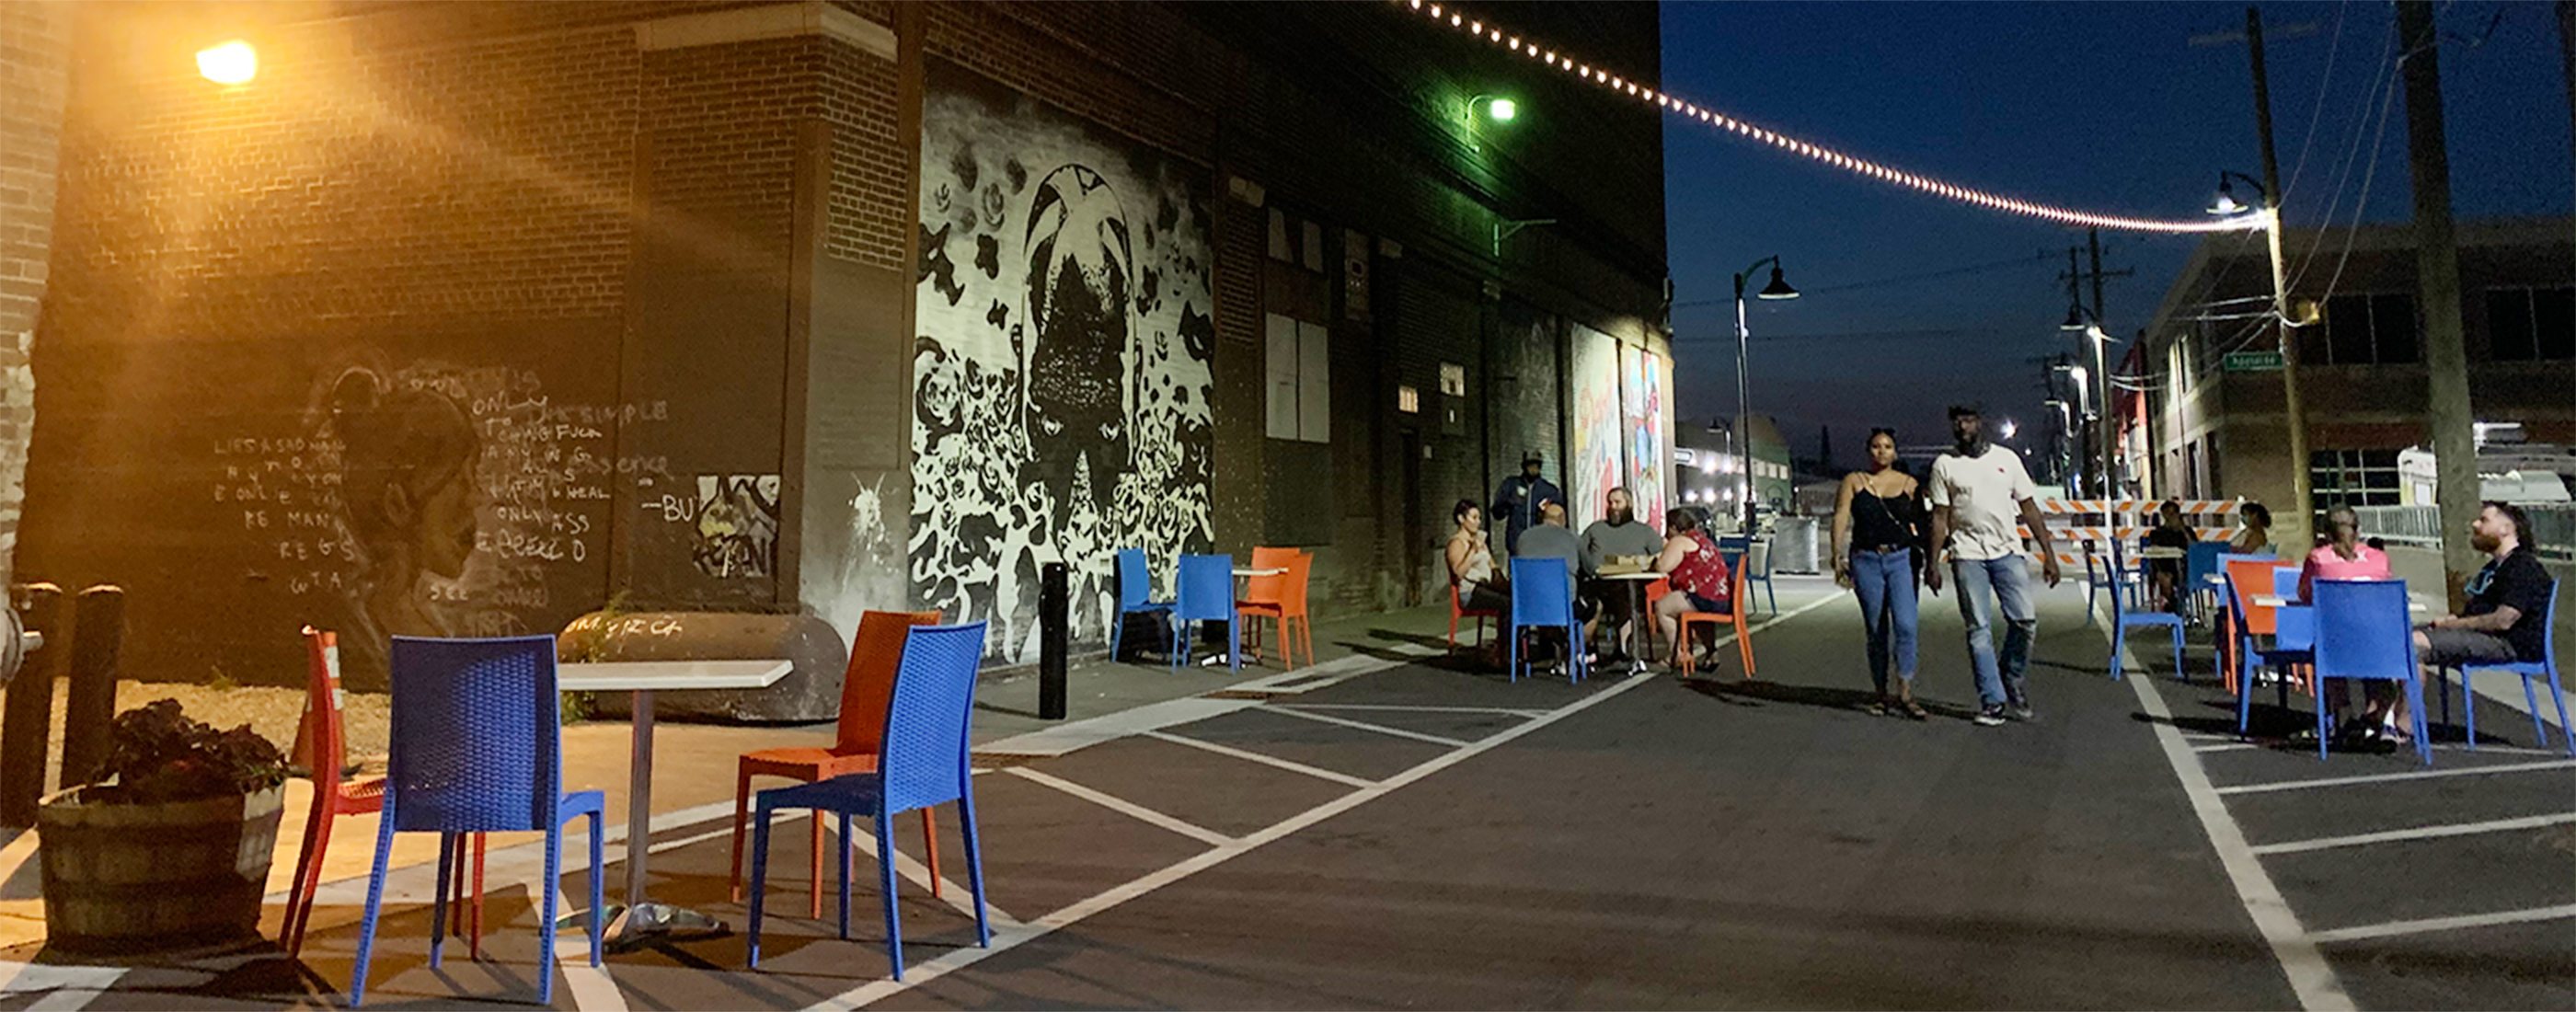 The two southernmost blocks were designed as a one-way “flex” street with flush curbs and sidewalk to allow the street to transform into a pedestrian plaza during social events held by the Eastern Market and local businesses as shown here